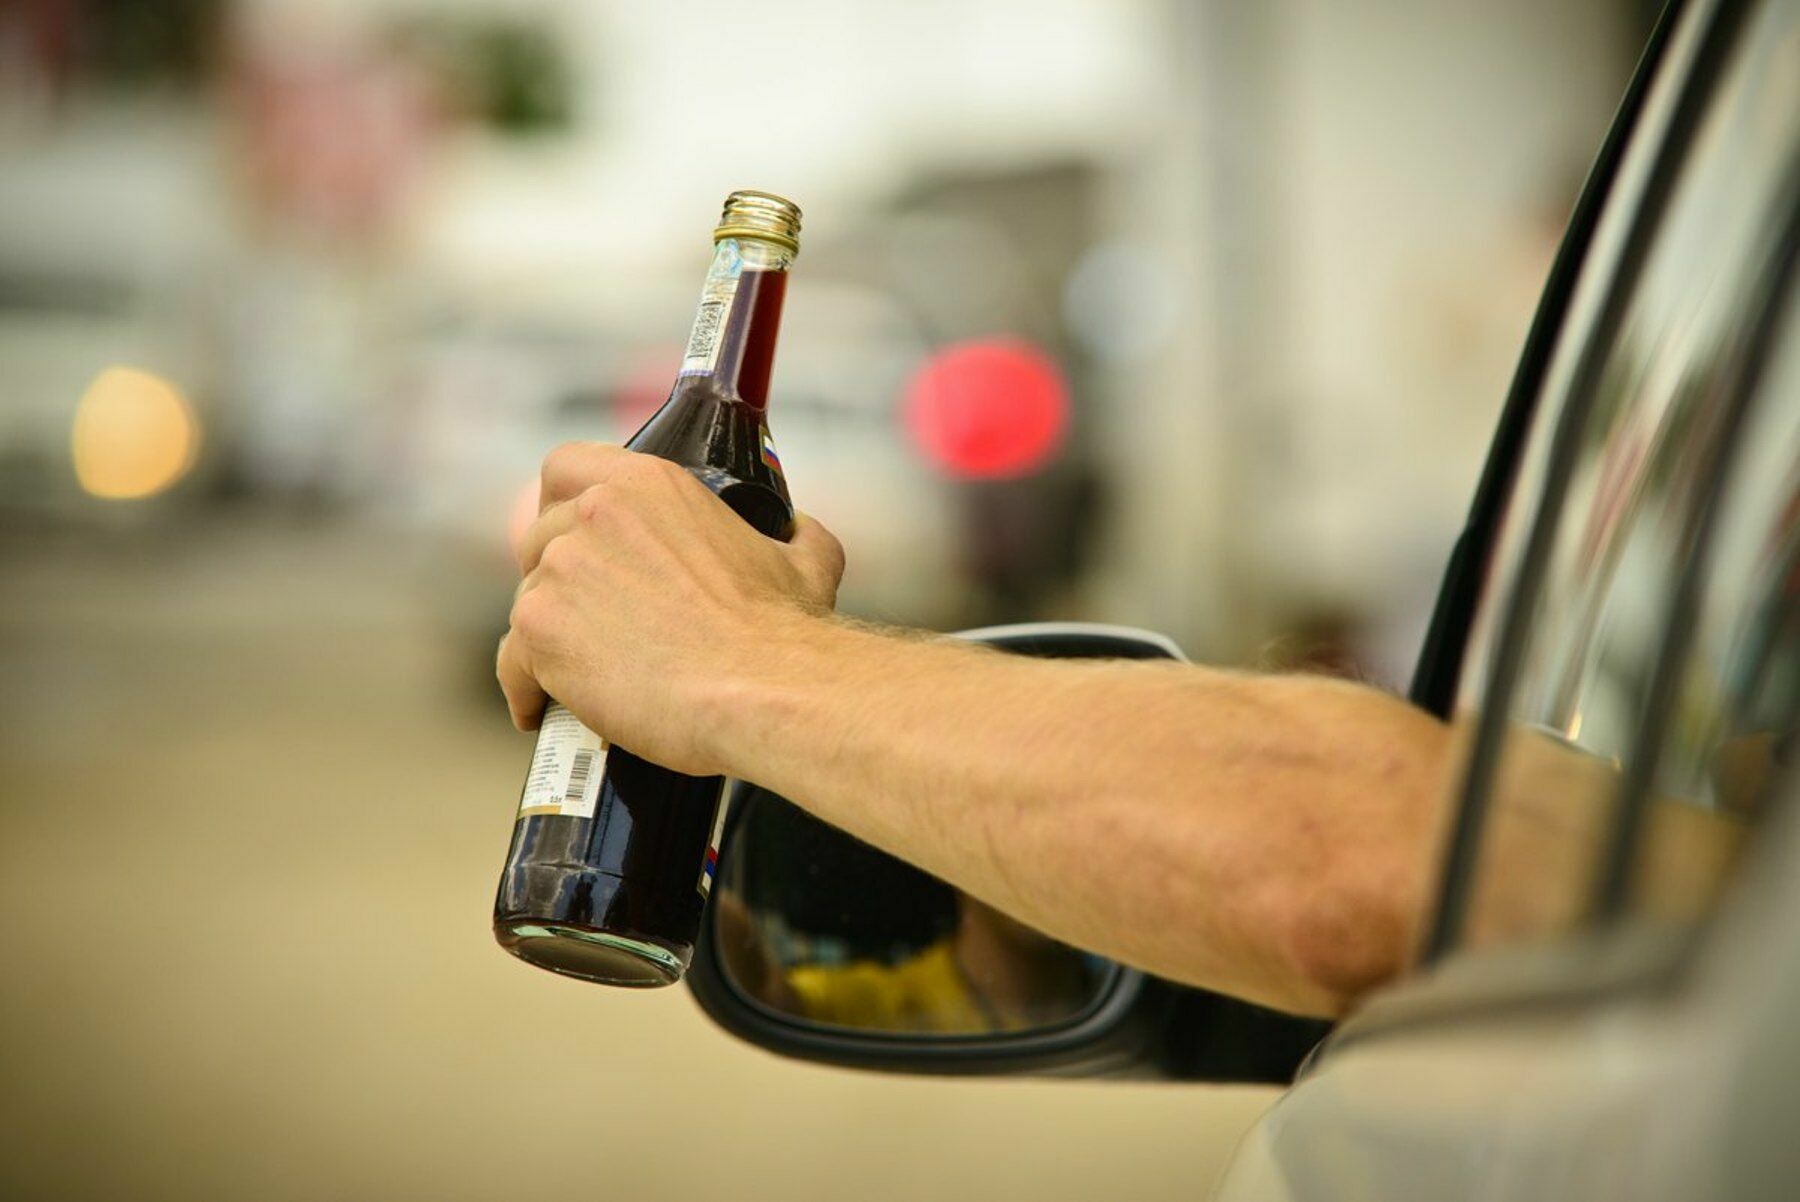 The authorities intend to revoke a driver's license for drunk driving